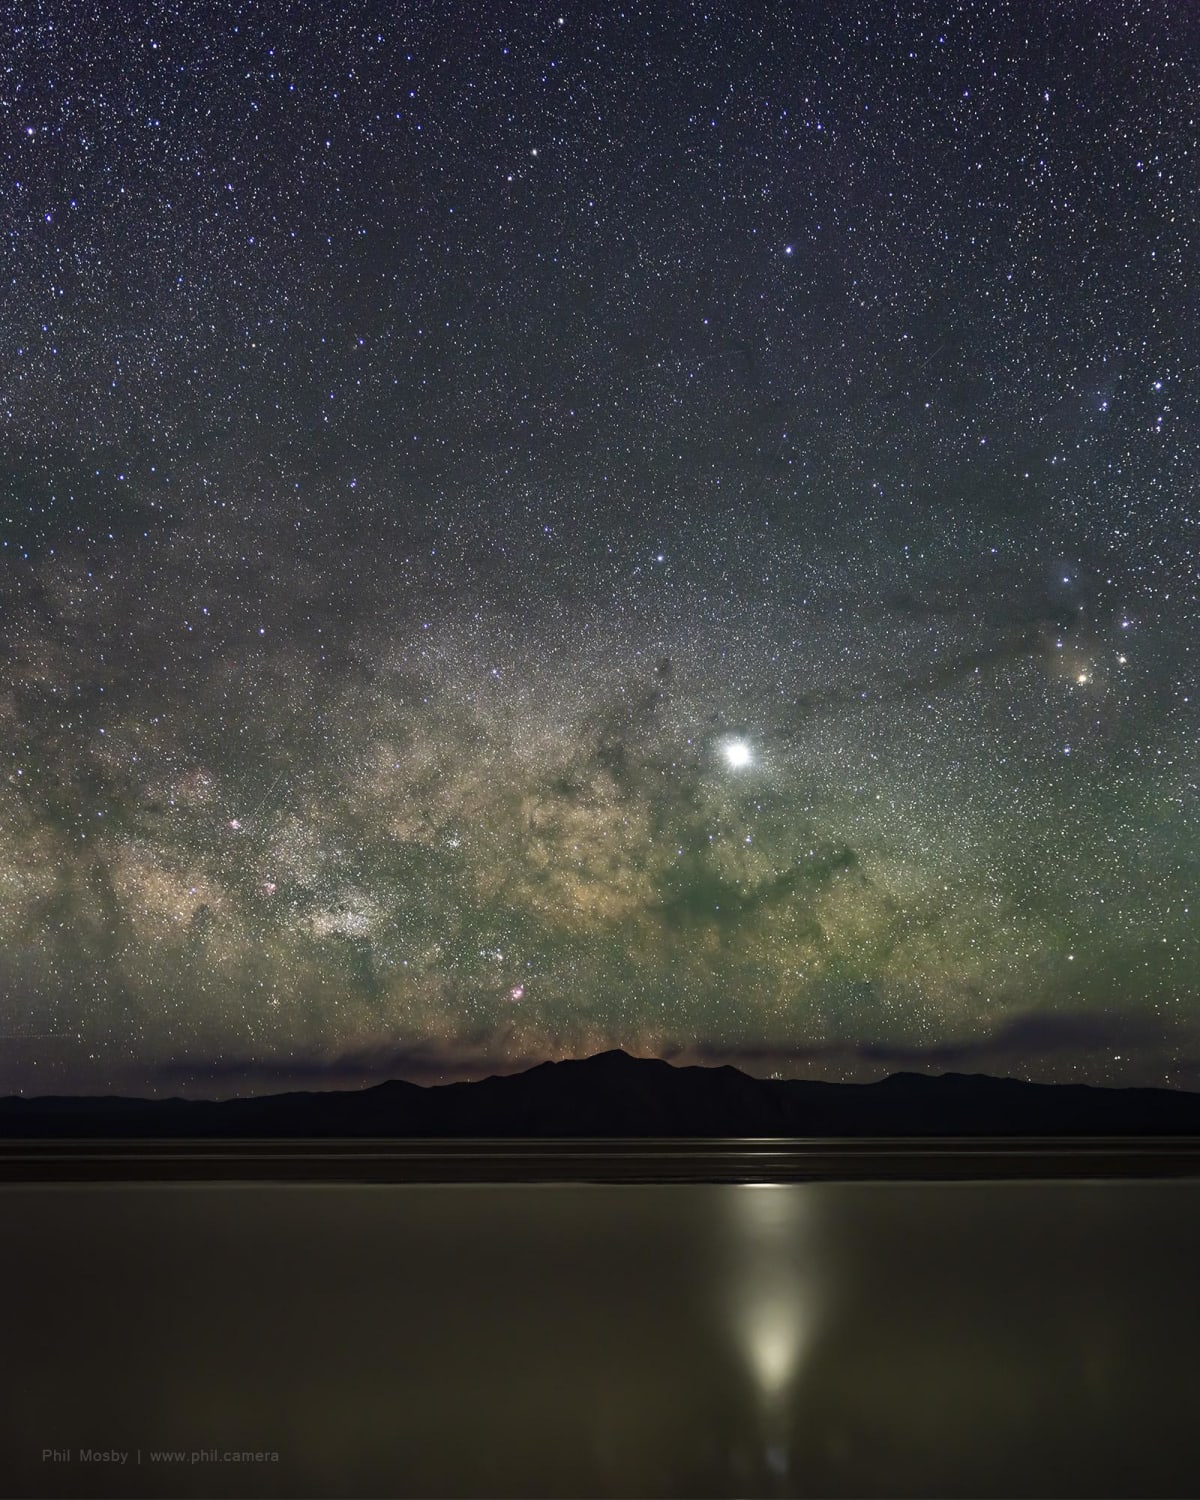 The Milky Way with Jupiter reflecting on the flooded Black Rock Desert, NV. Star-tracked and stitched for maximum detail.